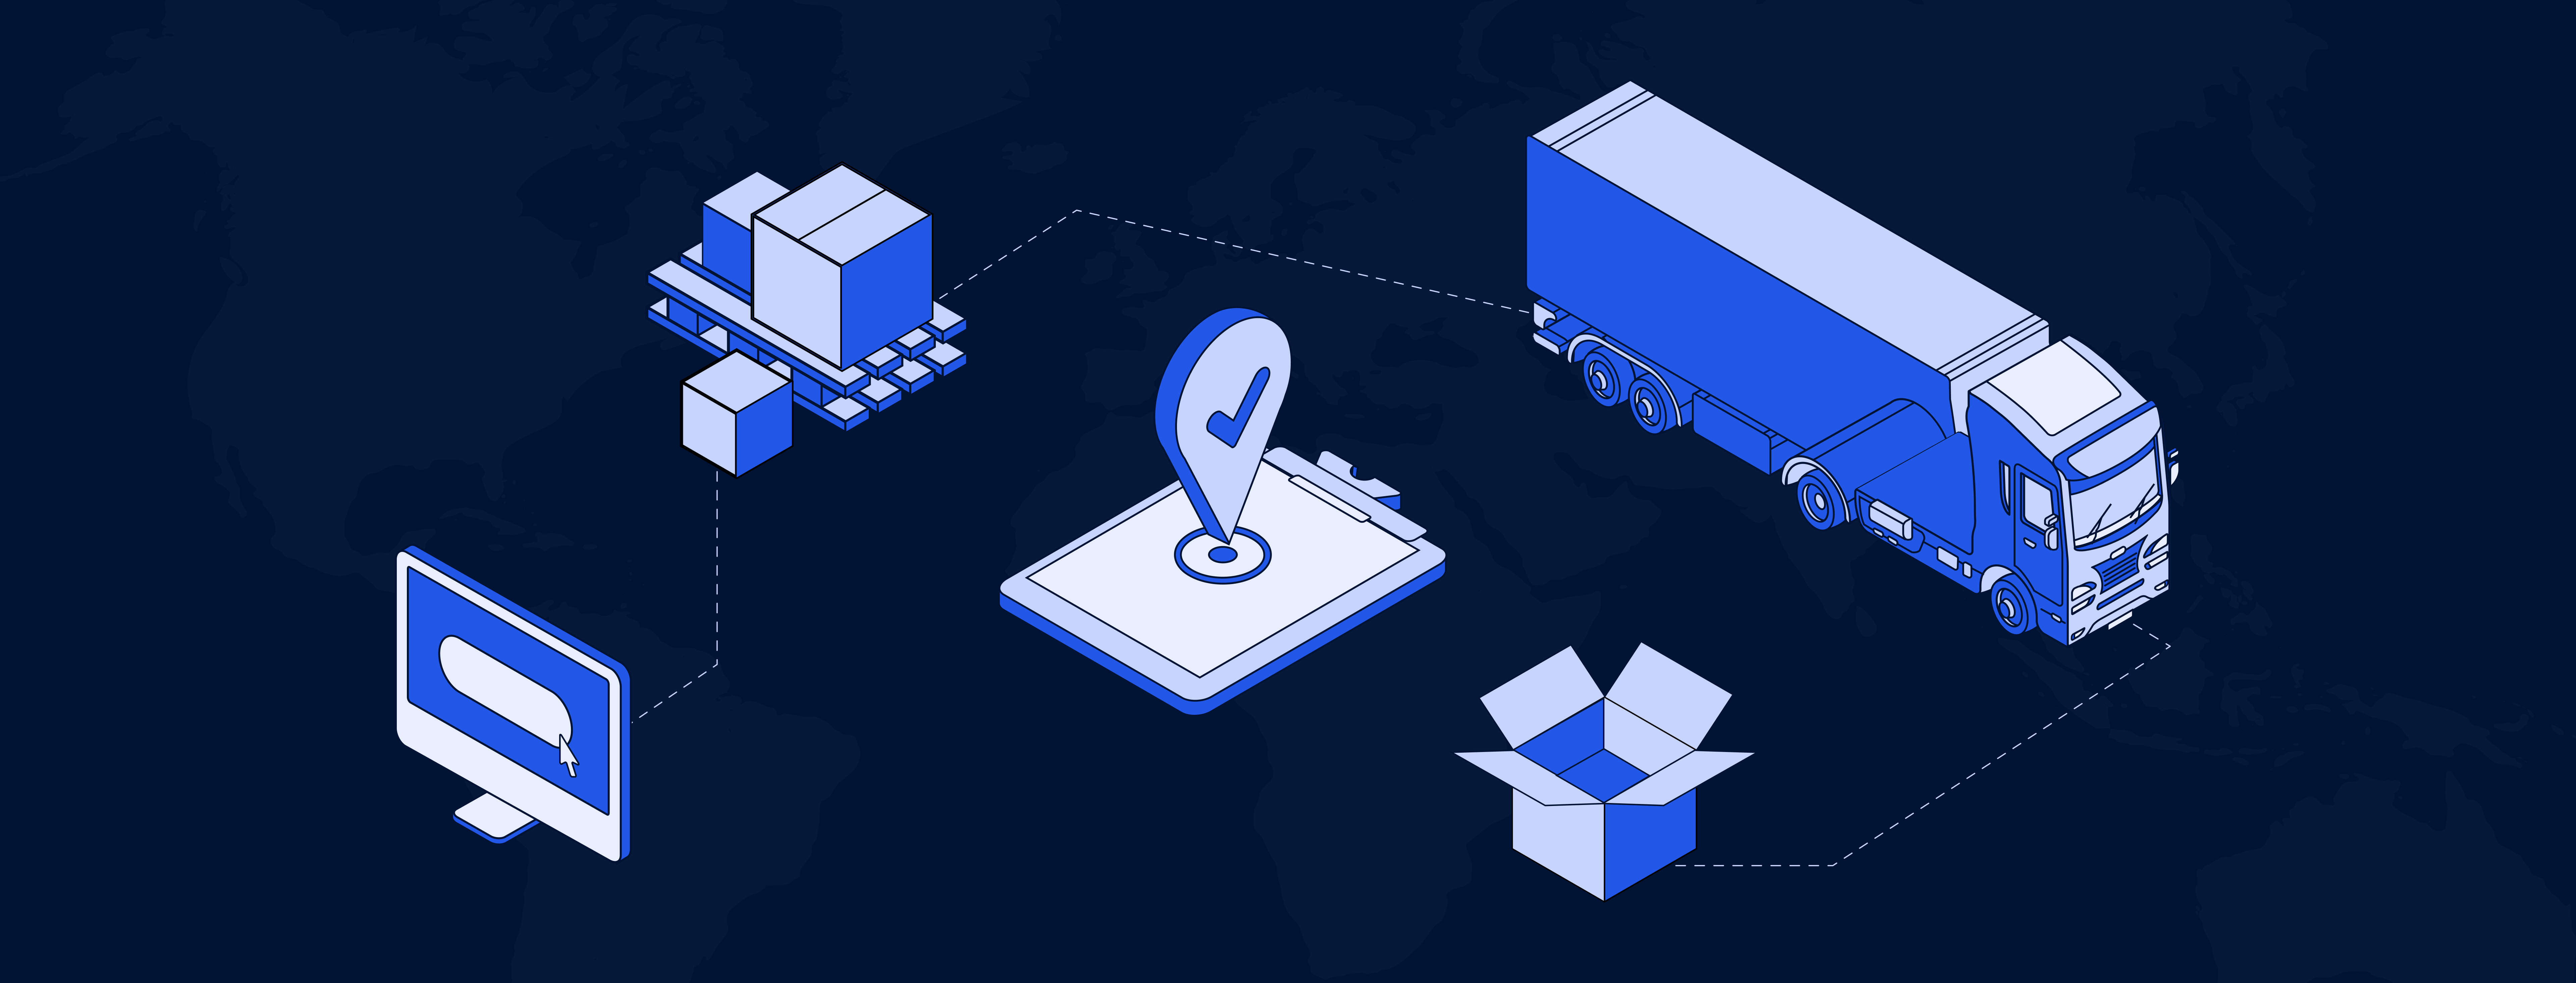 machine learning in supply chain